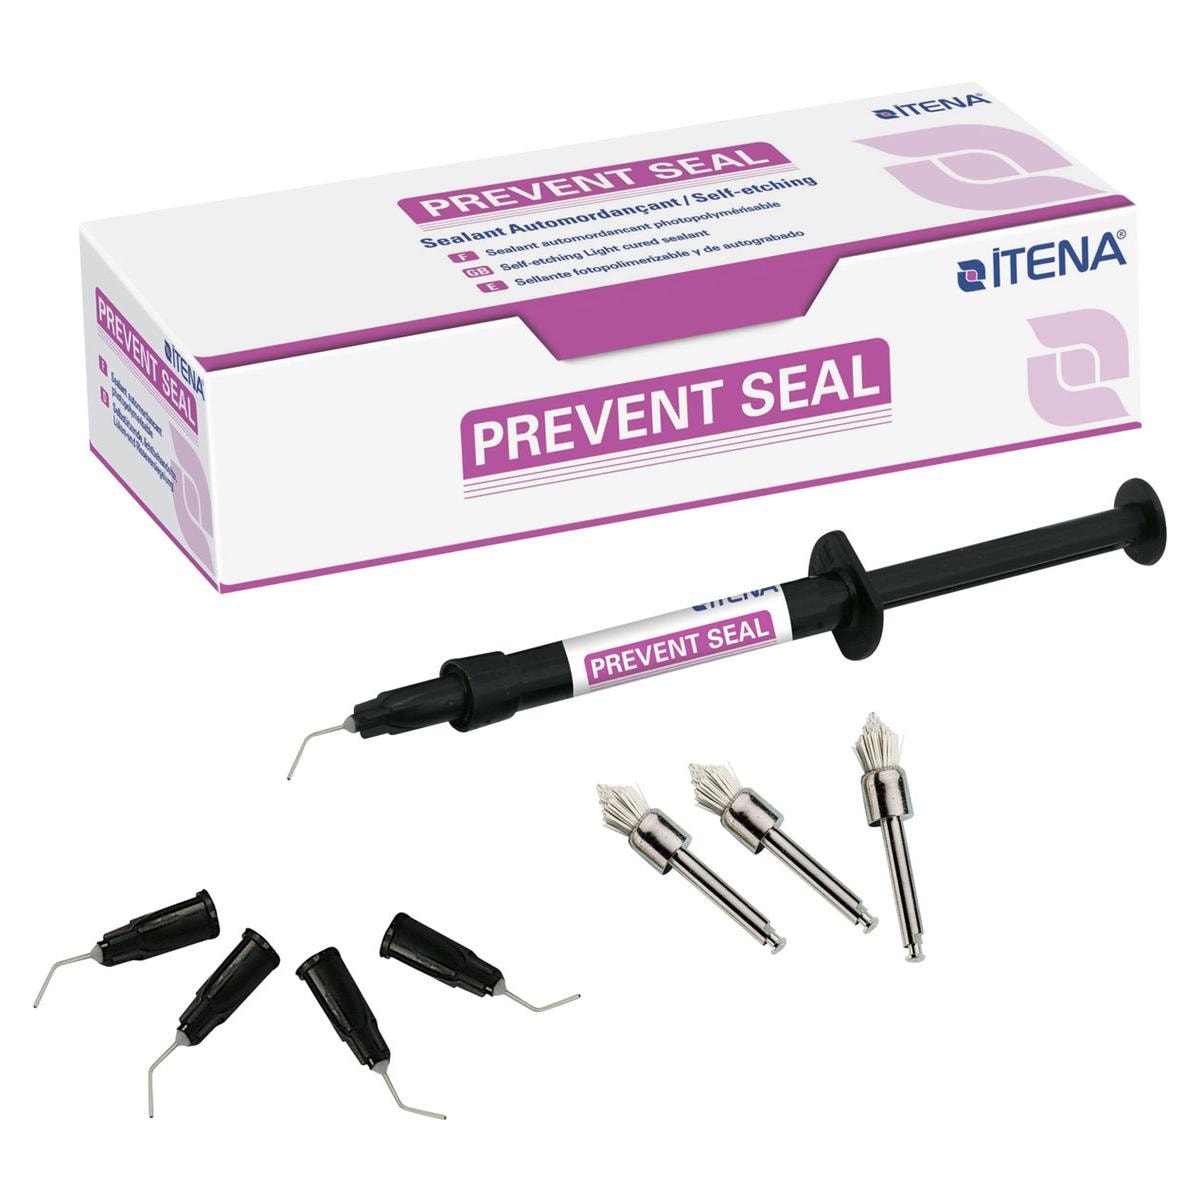 Prevent Seal - Emballage